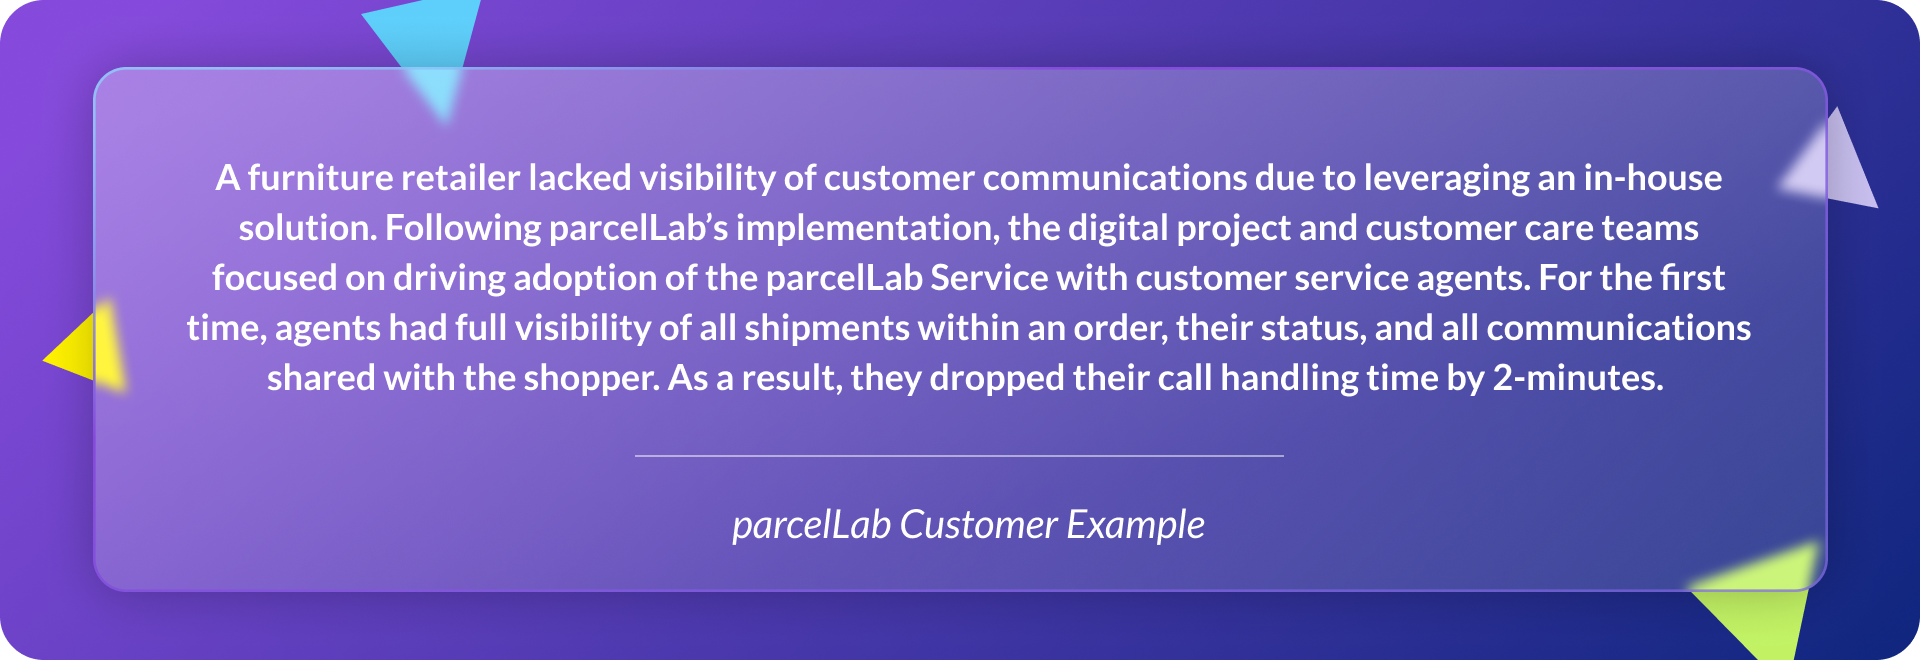 parcelLab customer example explaining how a furniture retailer lacked visibility of customer communications and how by leveraging parcelLab they recover revenue through the customer service team gaining full visibility over returns.